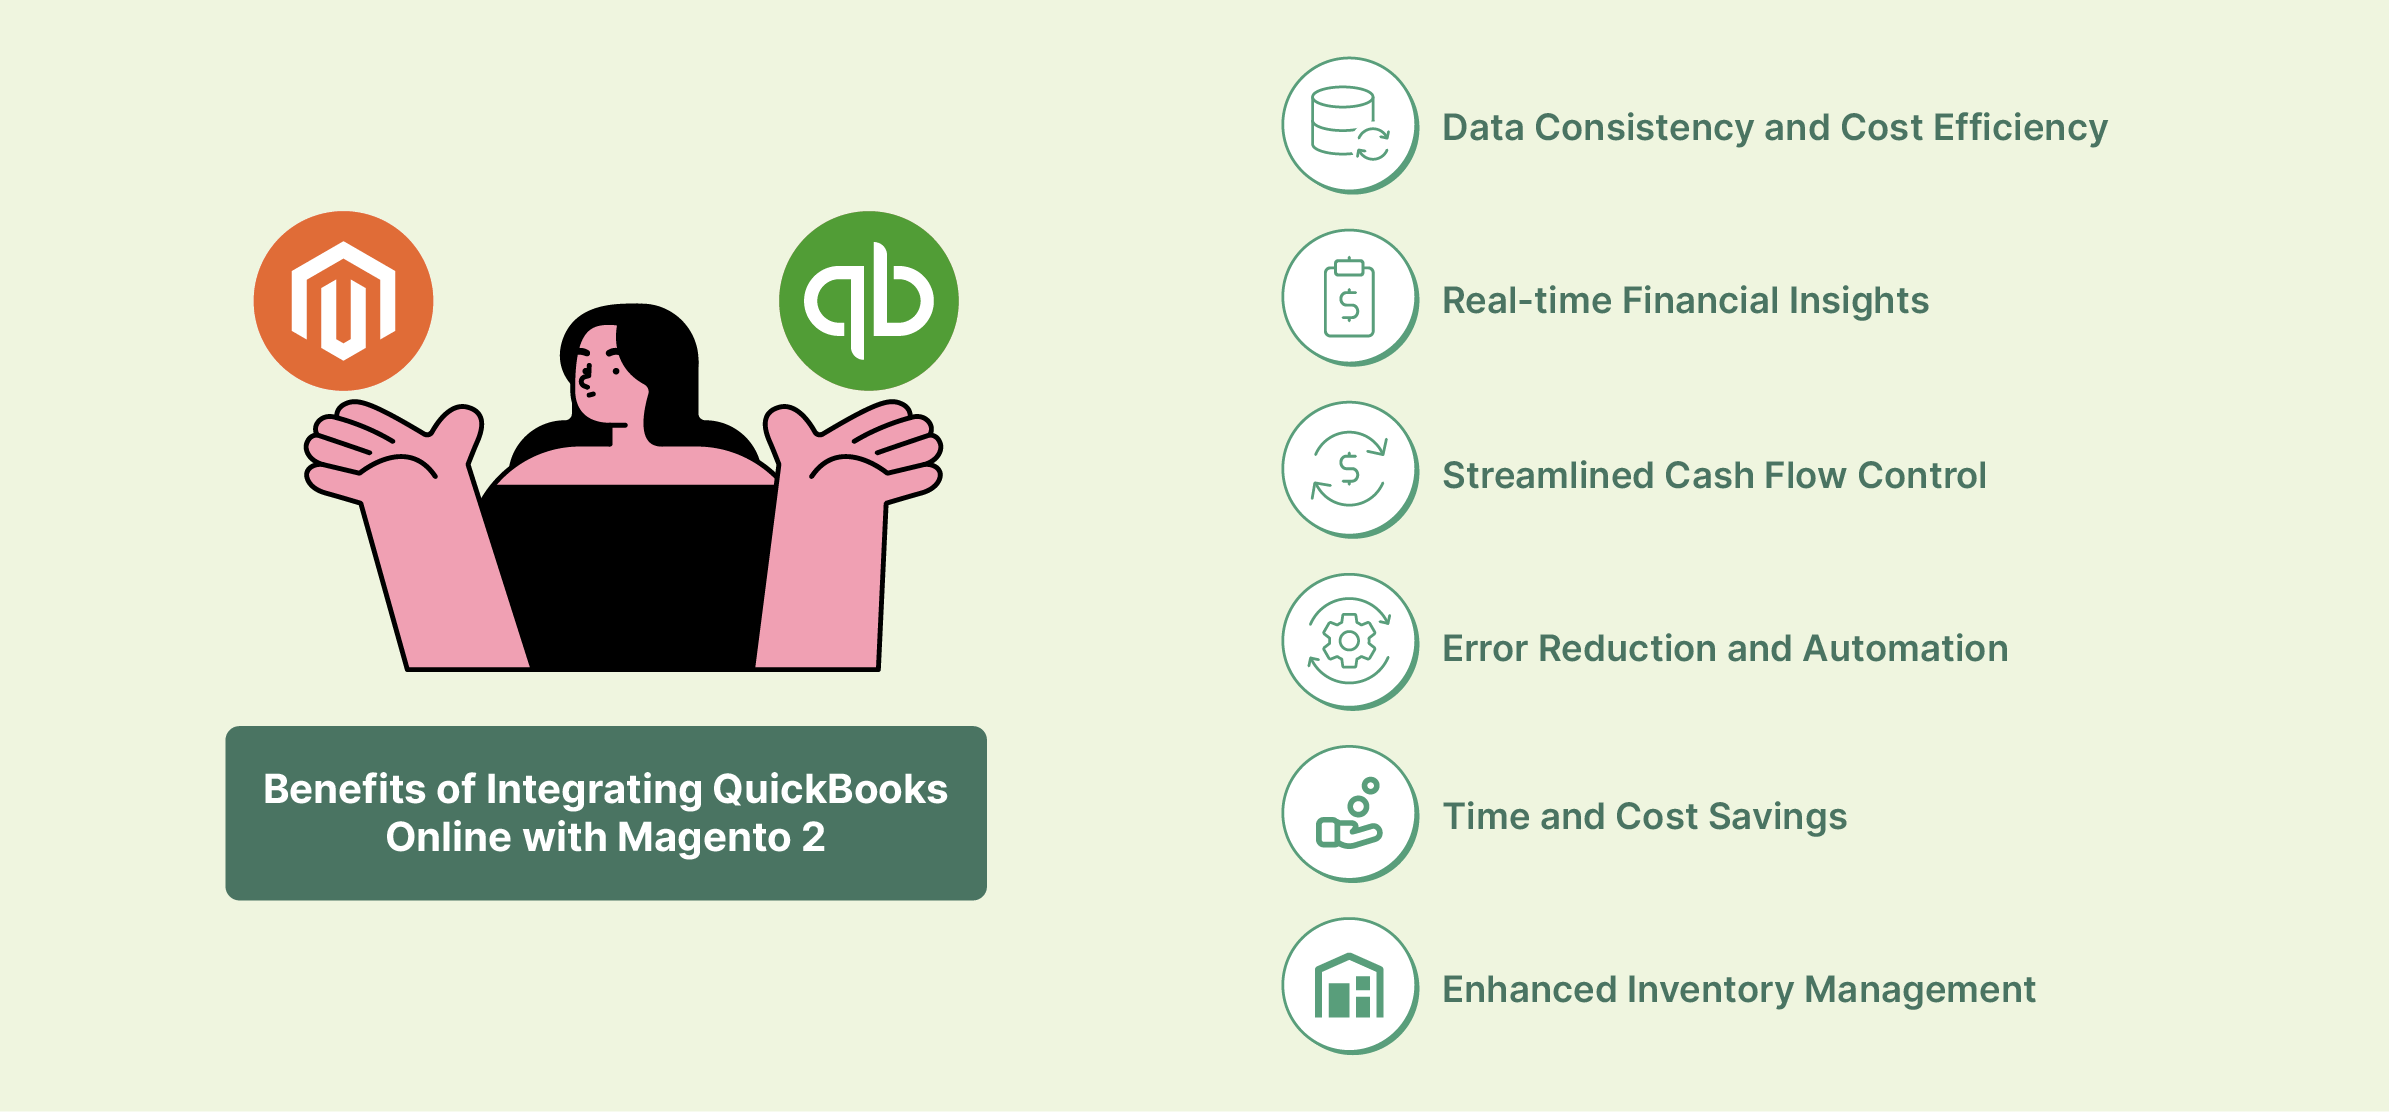 Advantages of QuickBooks Online integration with Magento 2 for businesses